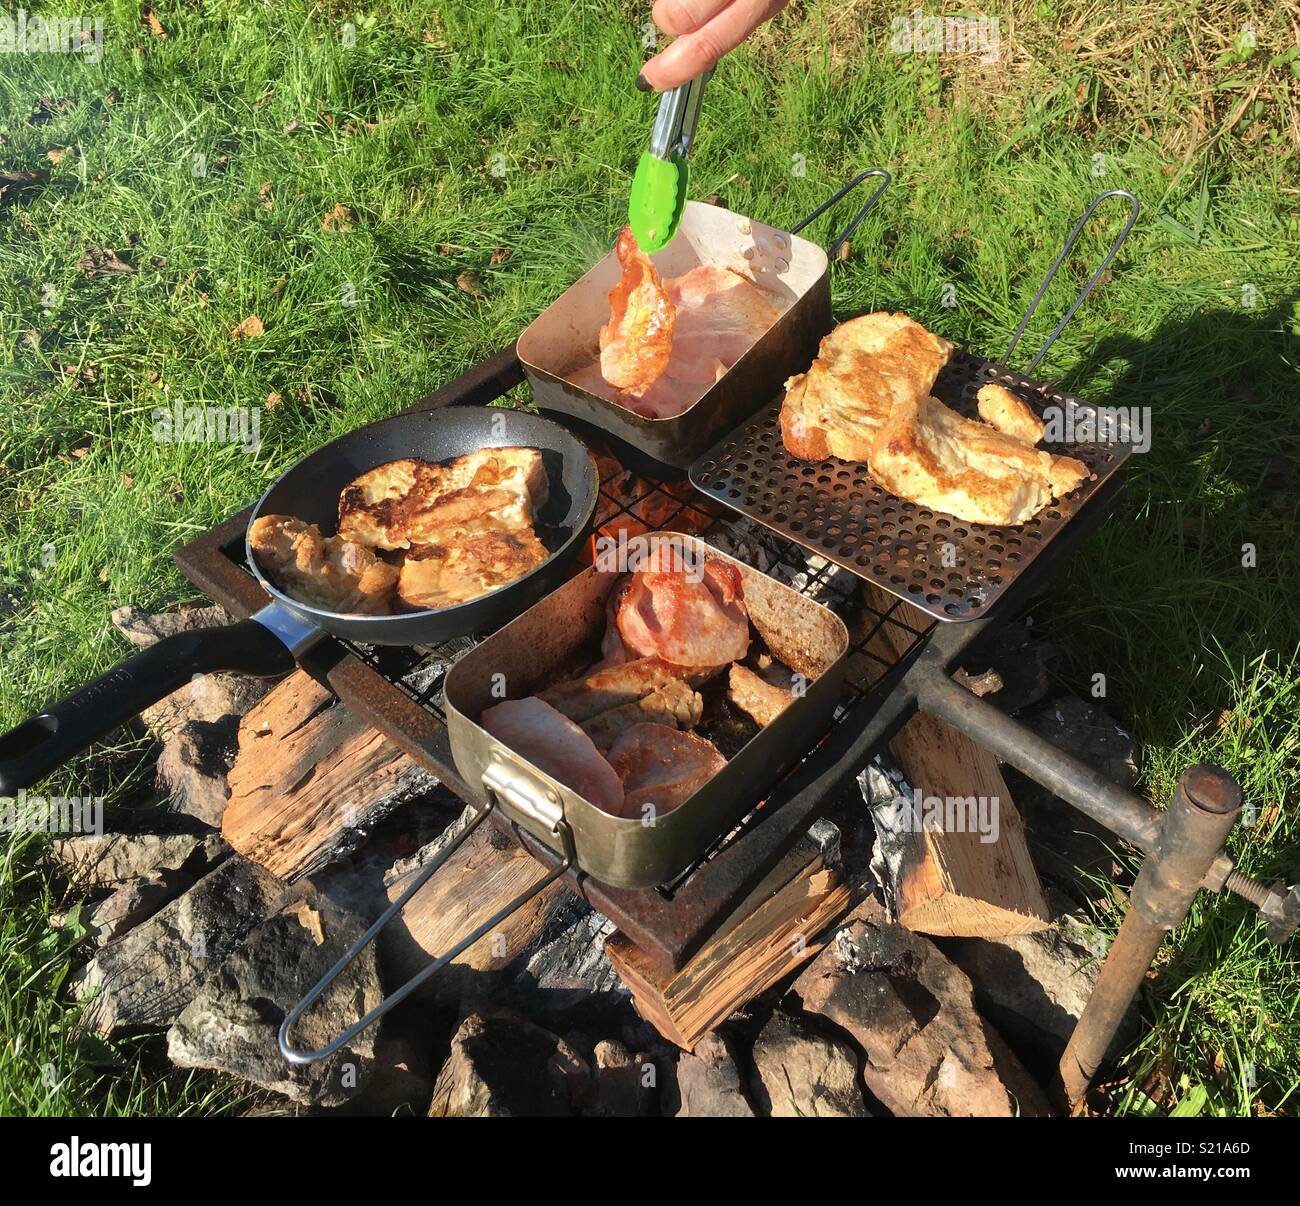 Cooking breakfast on a campsite Stock Photo